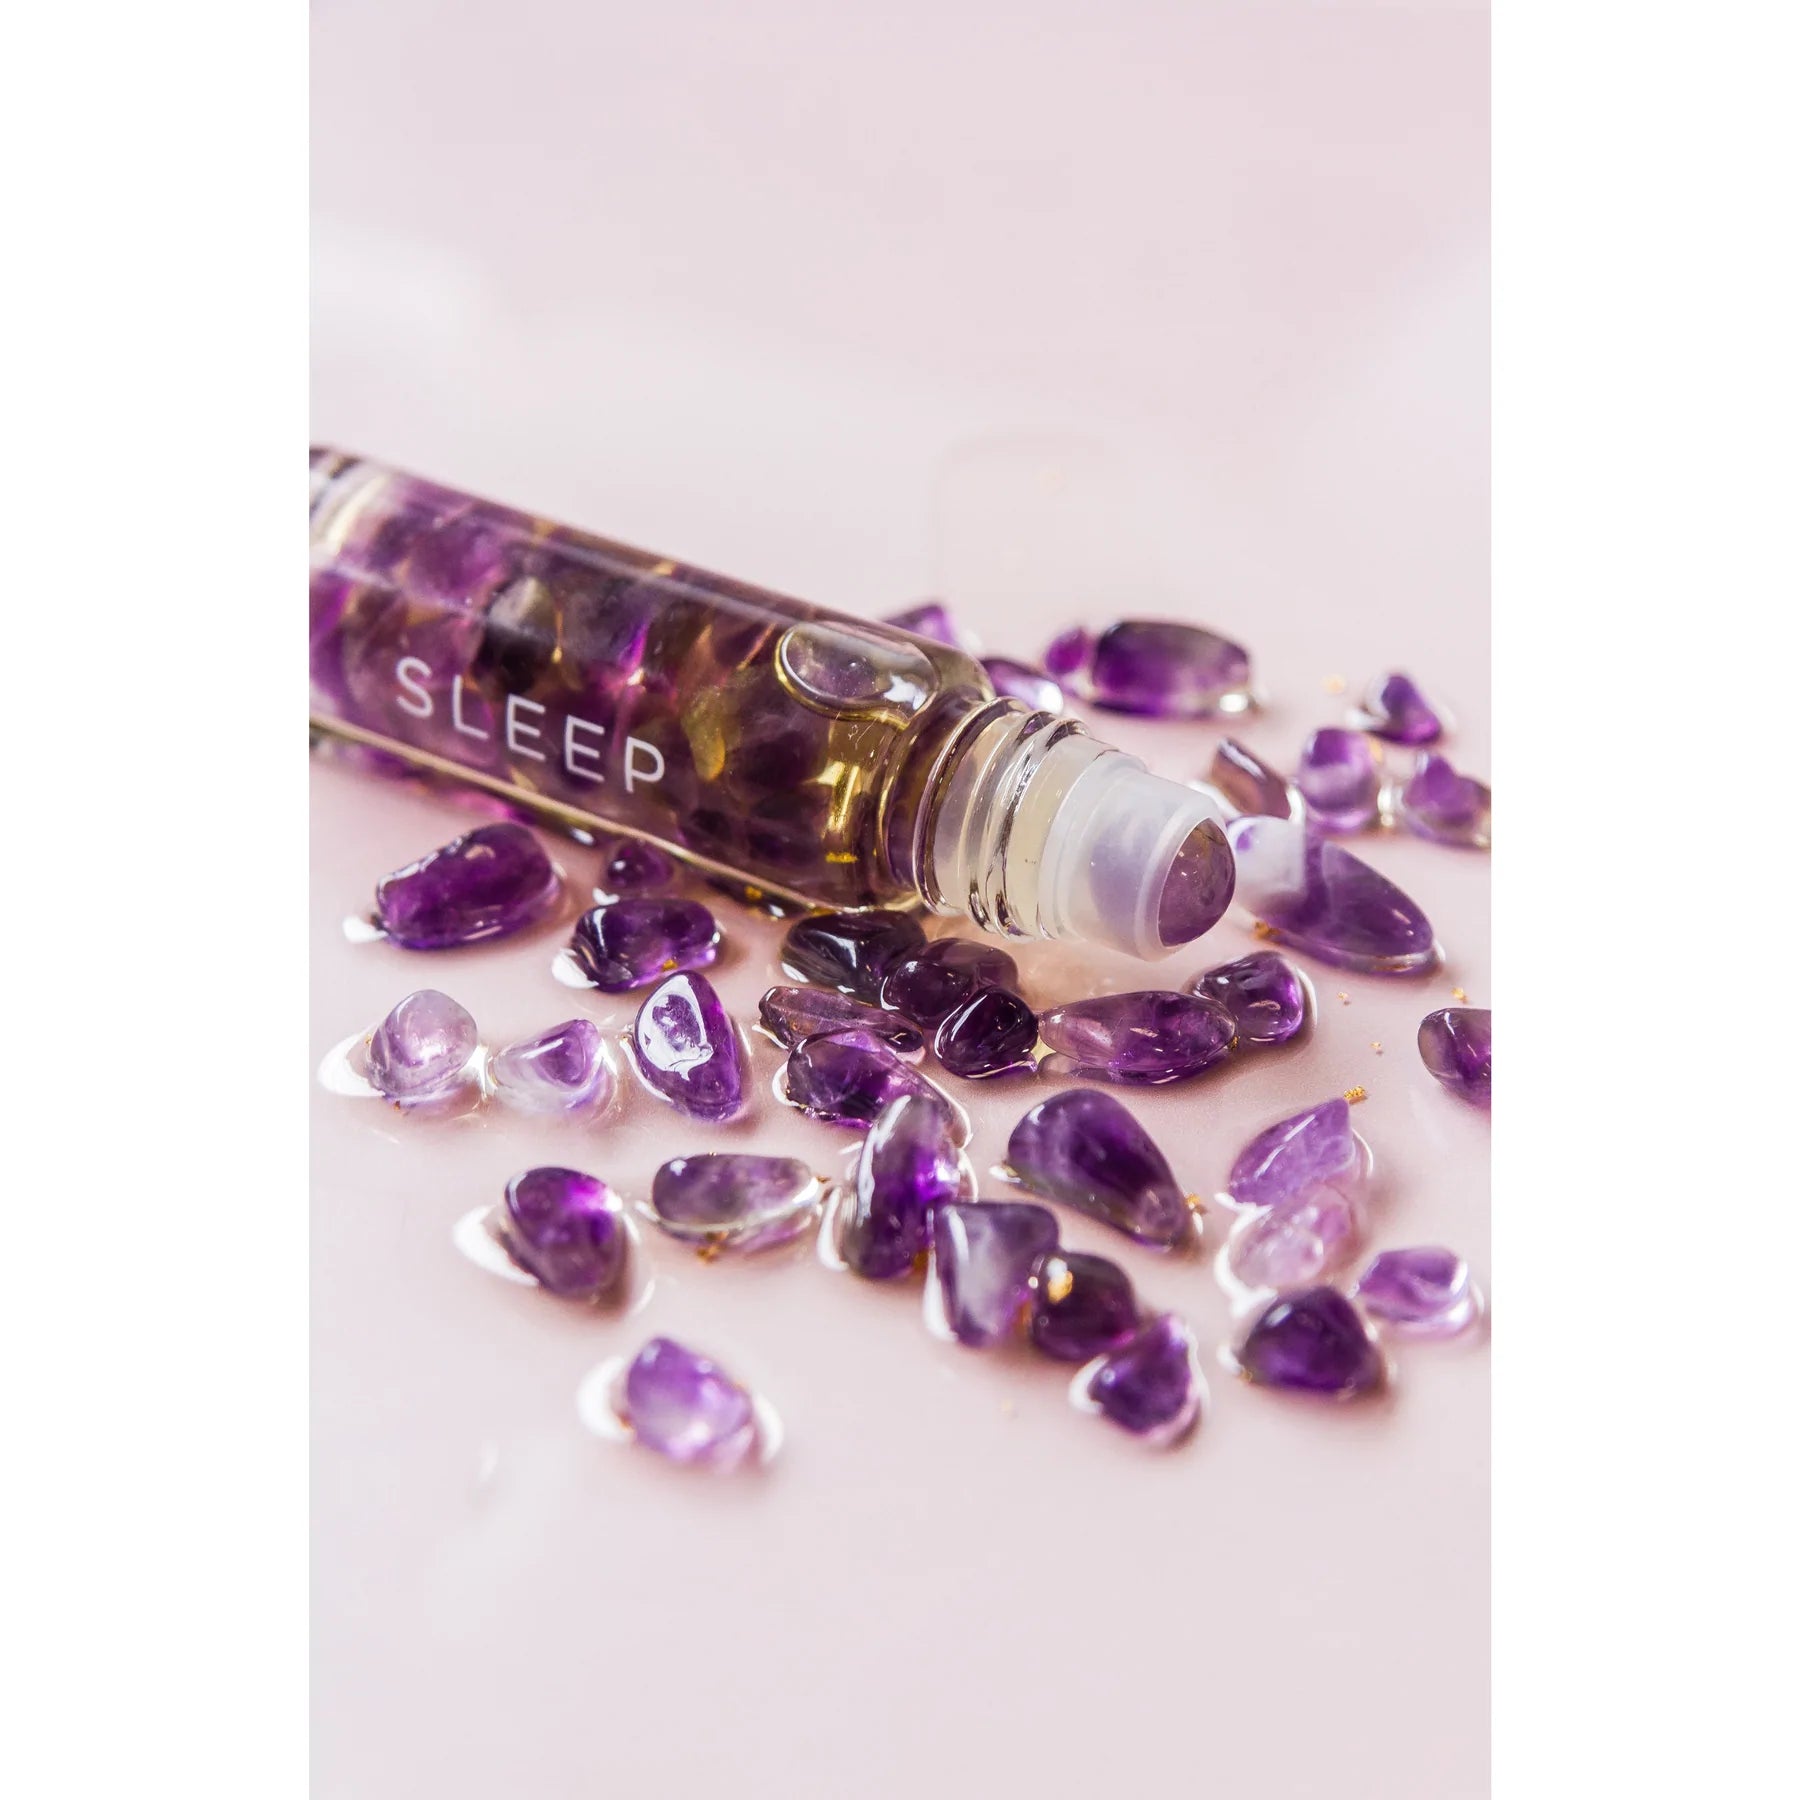 SLEEP Essential Oil Roller Amethyst Crystals 24k Gold 10ml - Inspire Me Naturally 